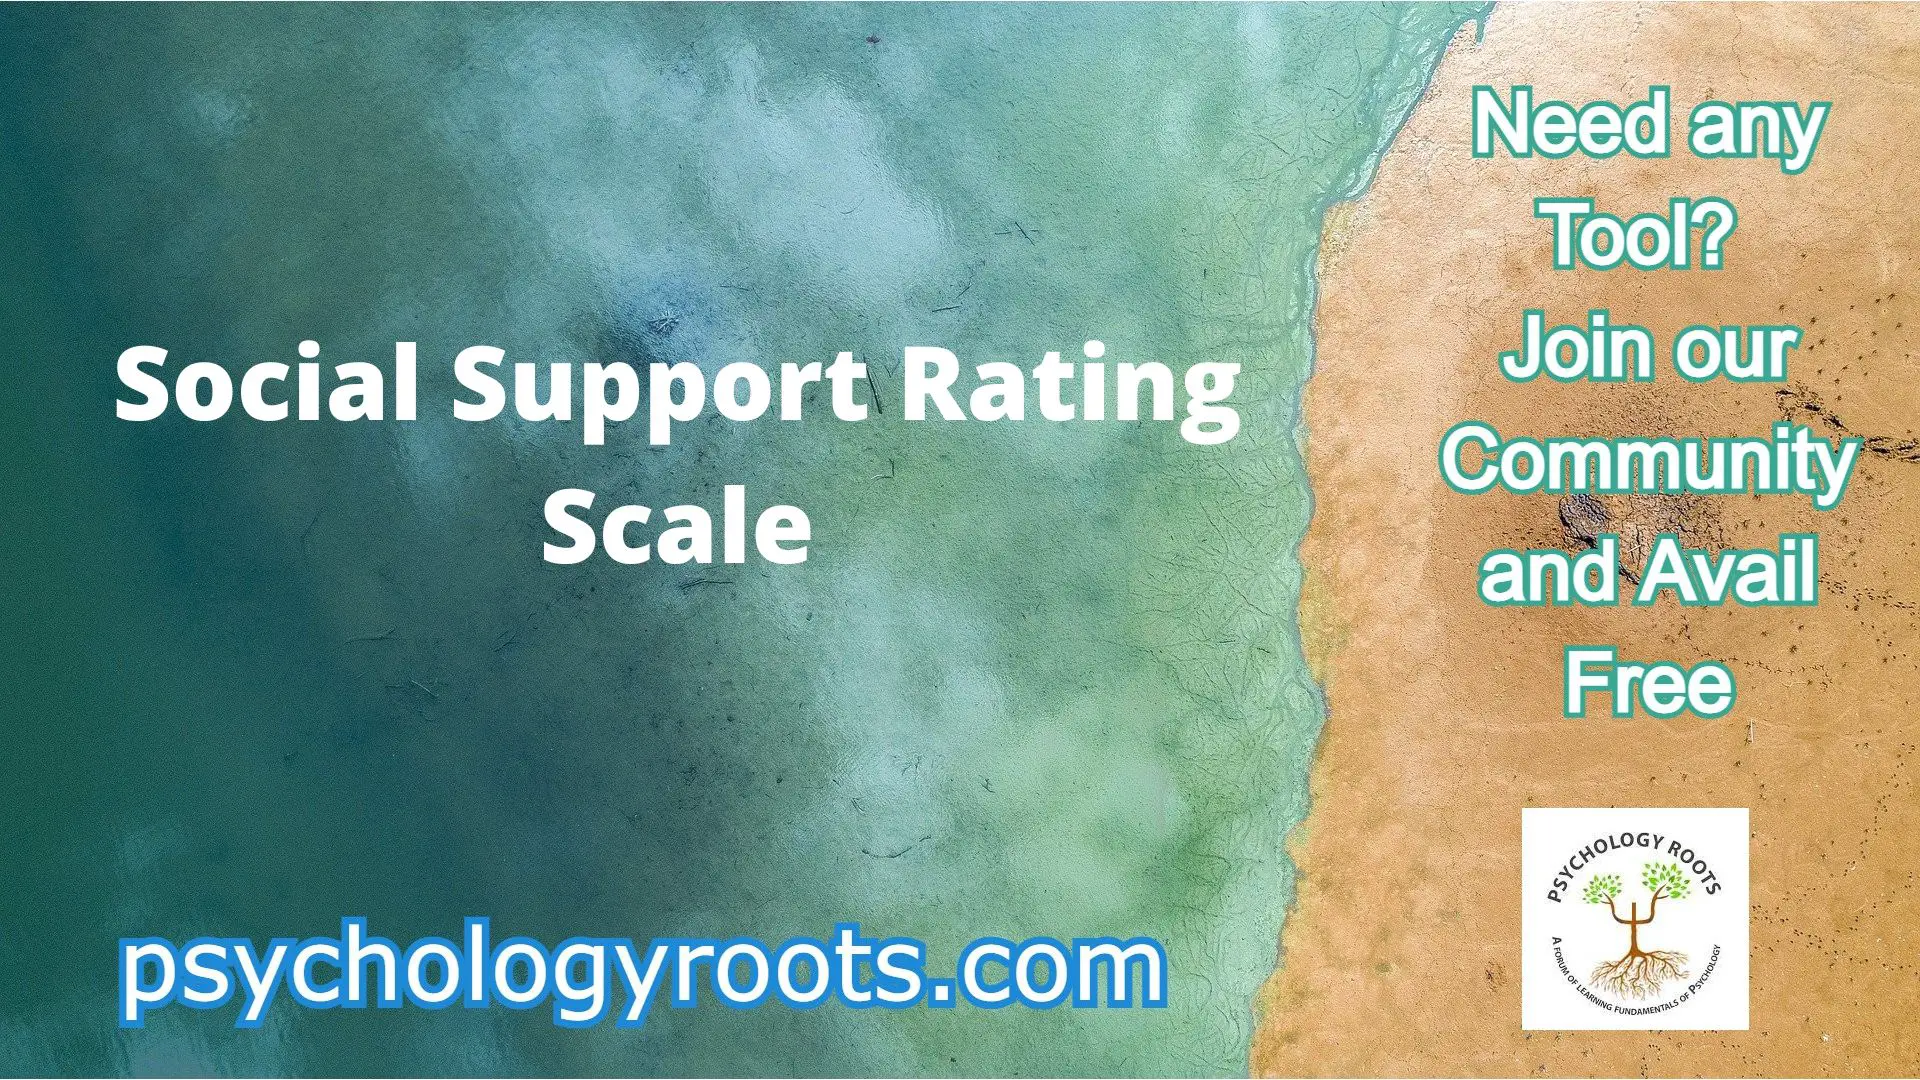 Social Support Rating Scale